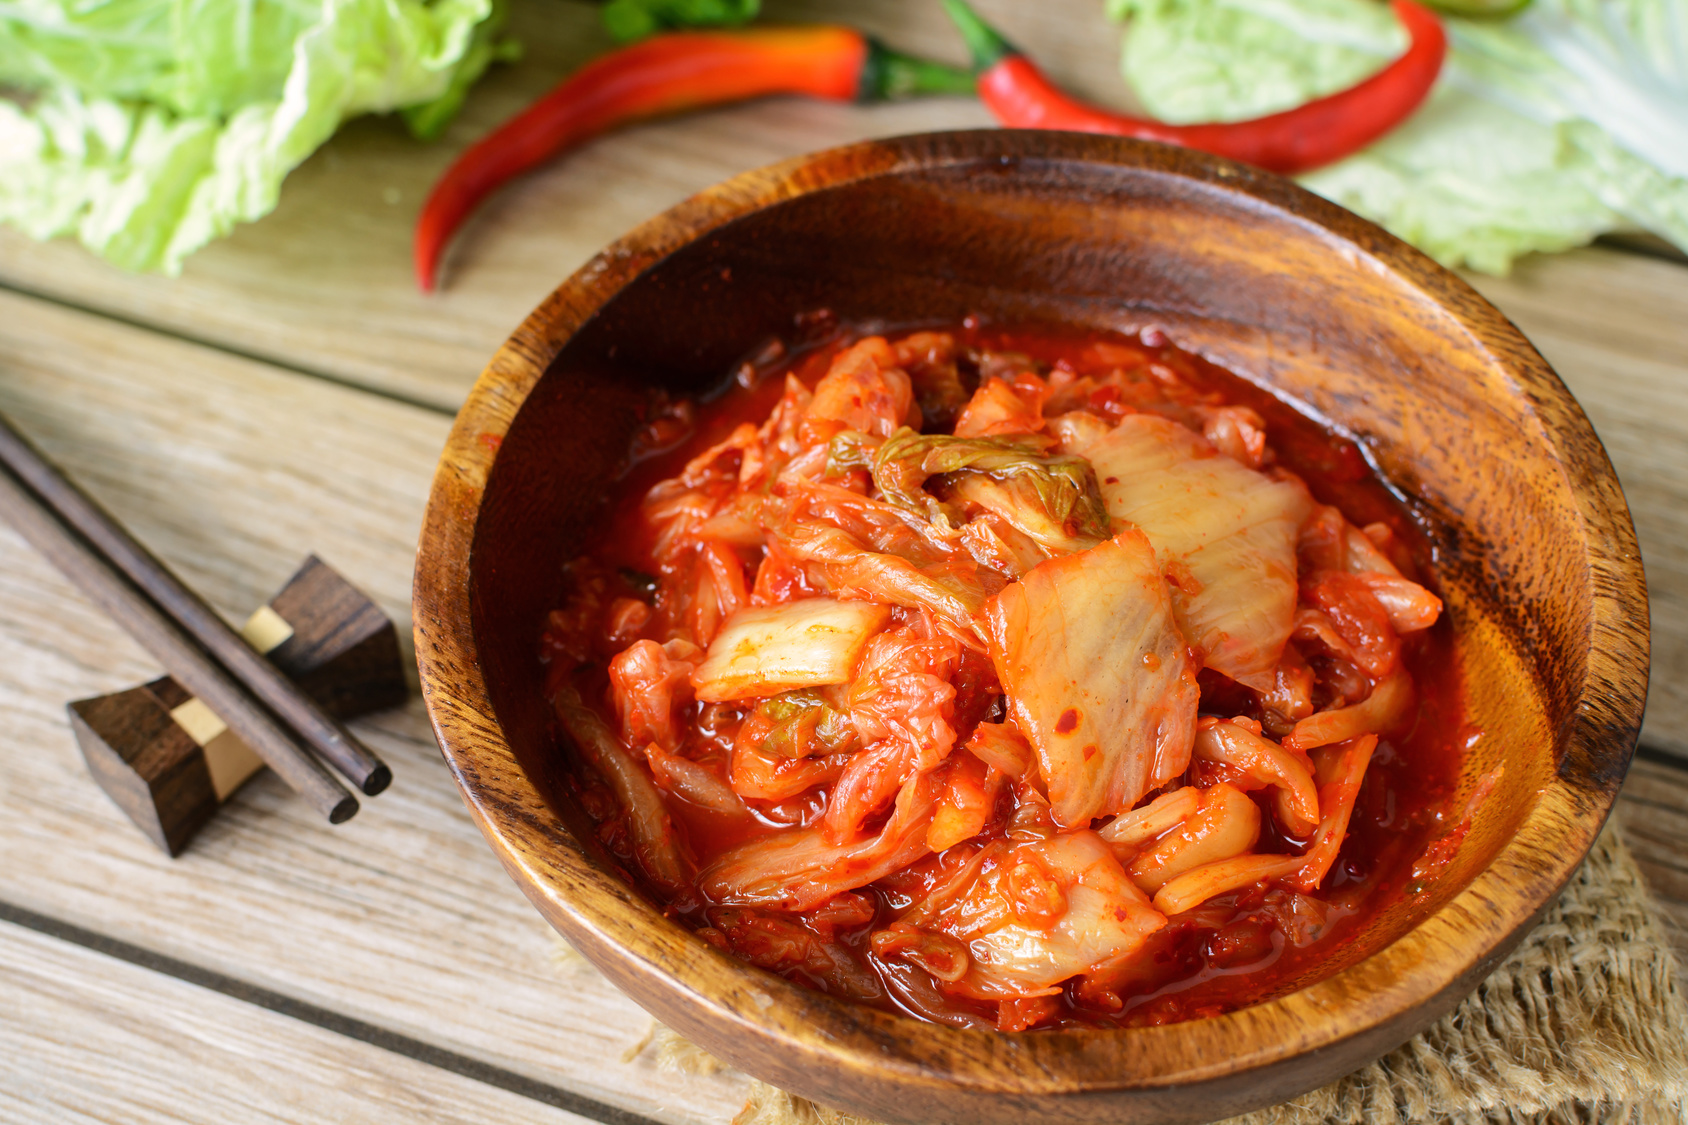 Do kimchi and other fermented foods help you lose weight?